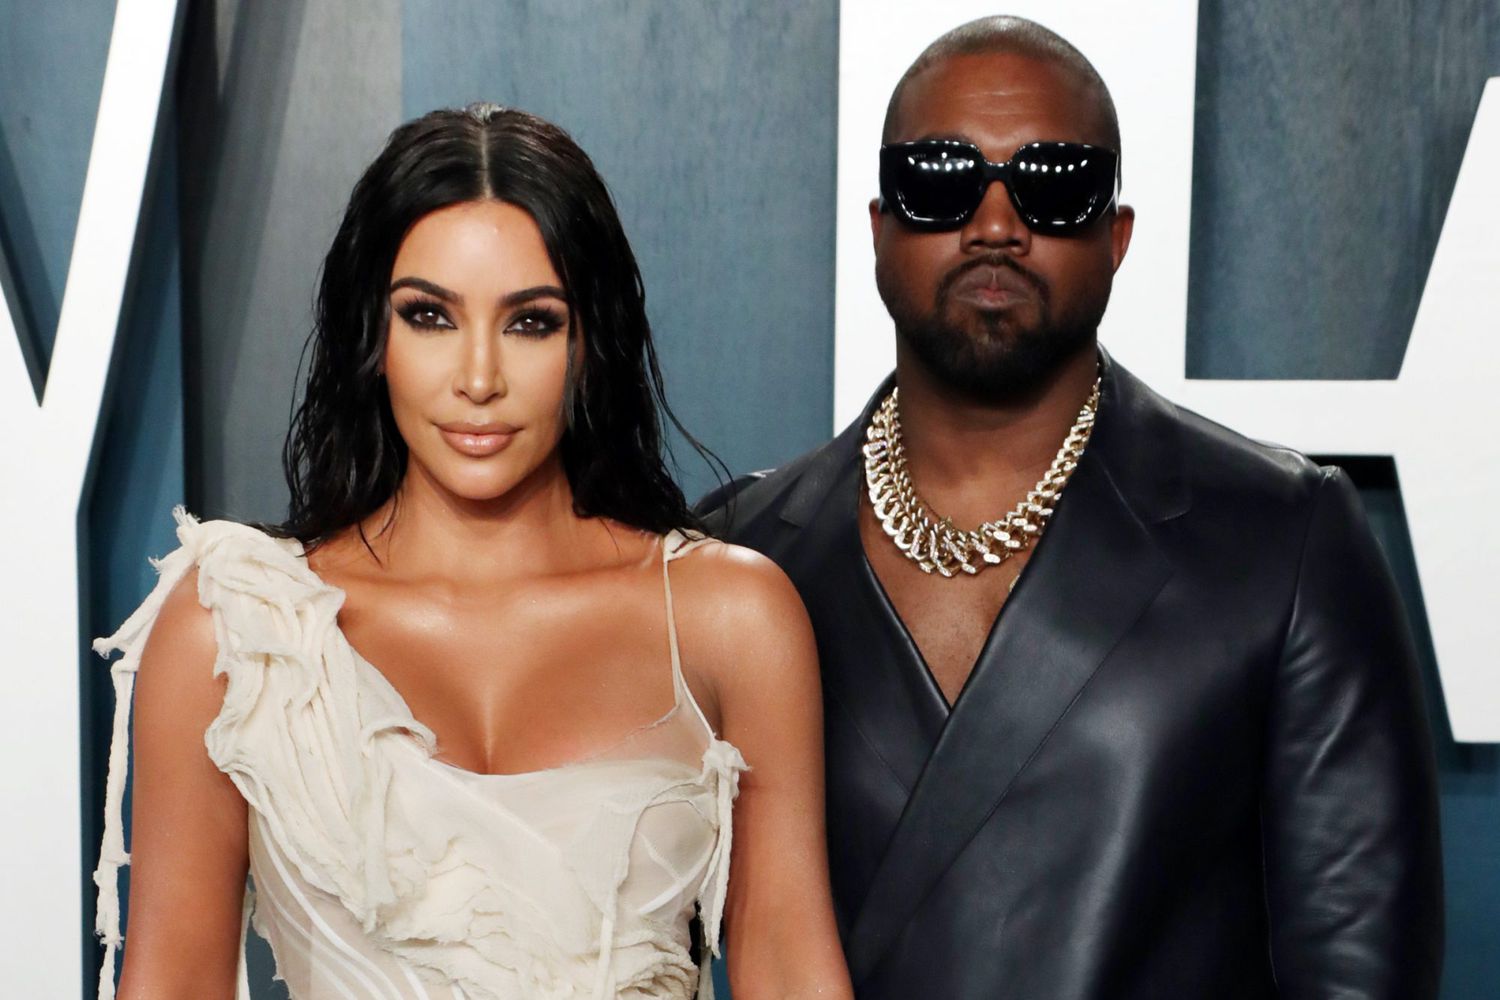 Kim Kardashian and Kanye West Prepare to Divorce: Inside Their Rollercoaster 2020 | PEOPLE.com